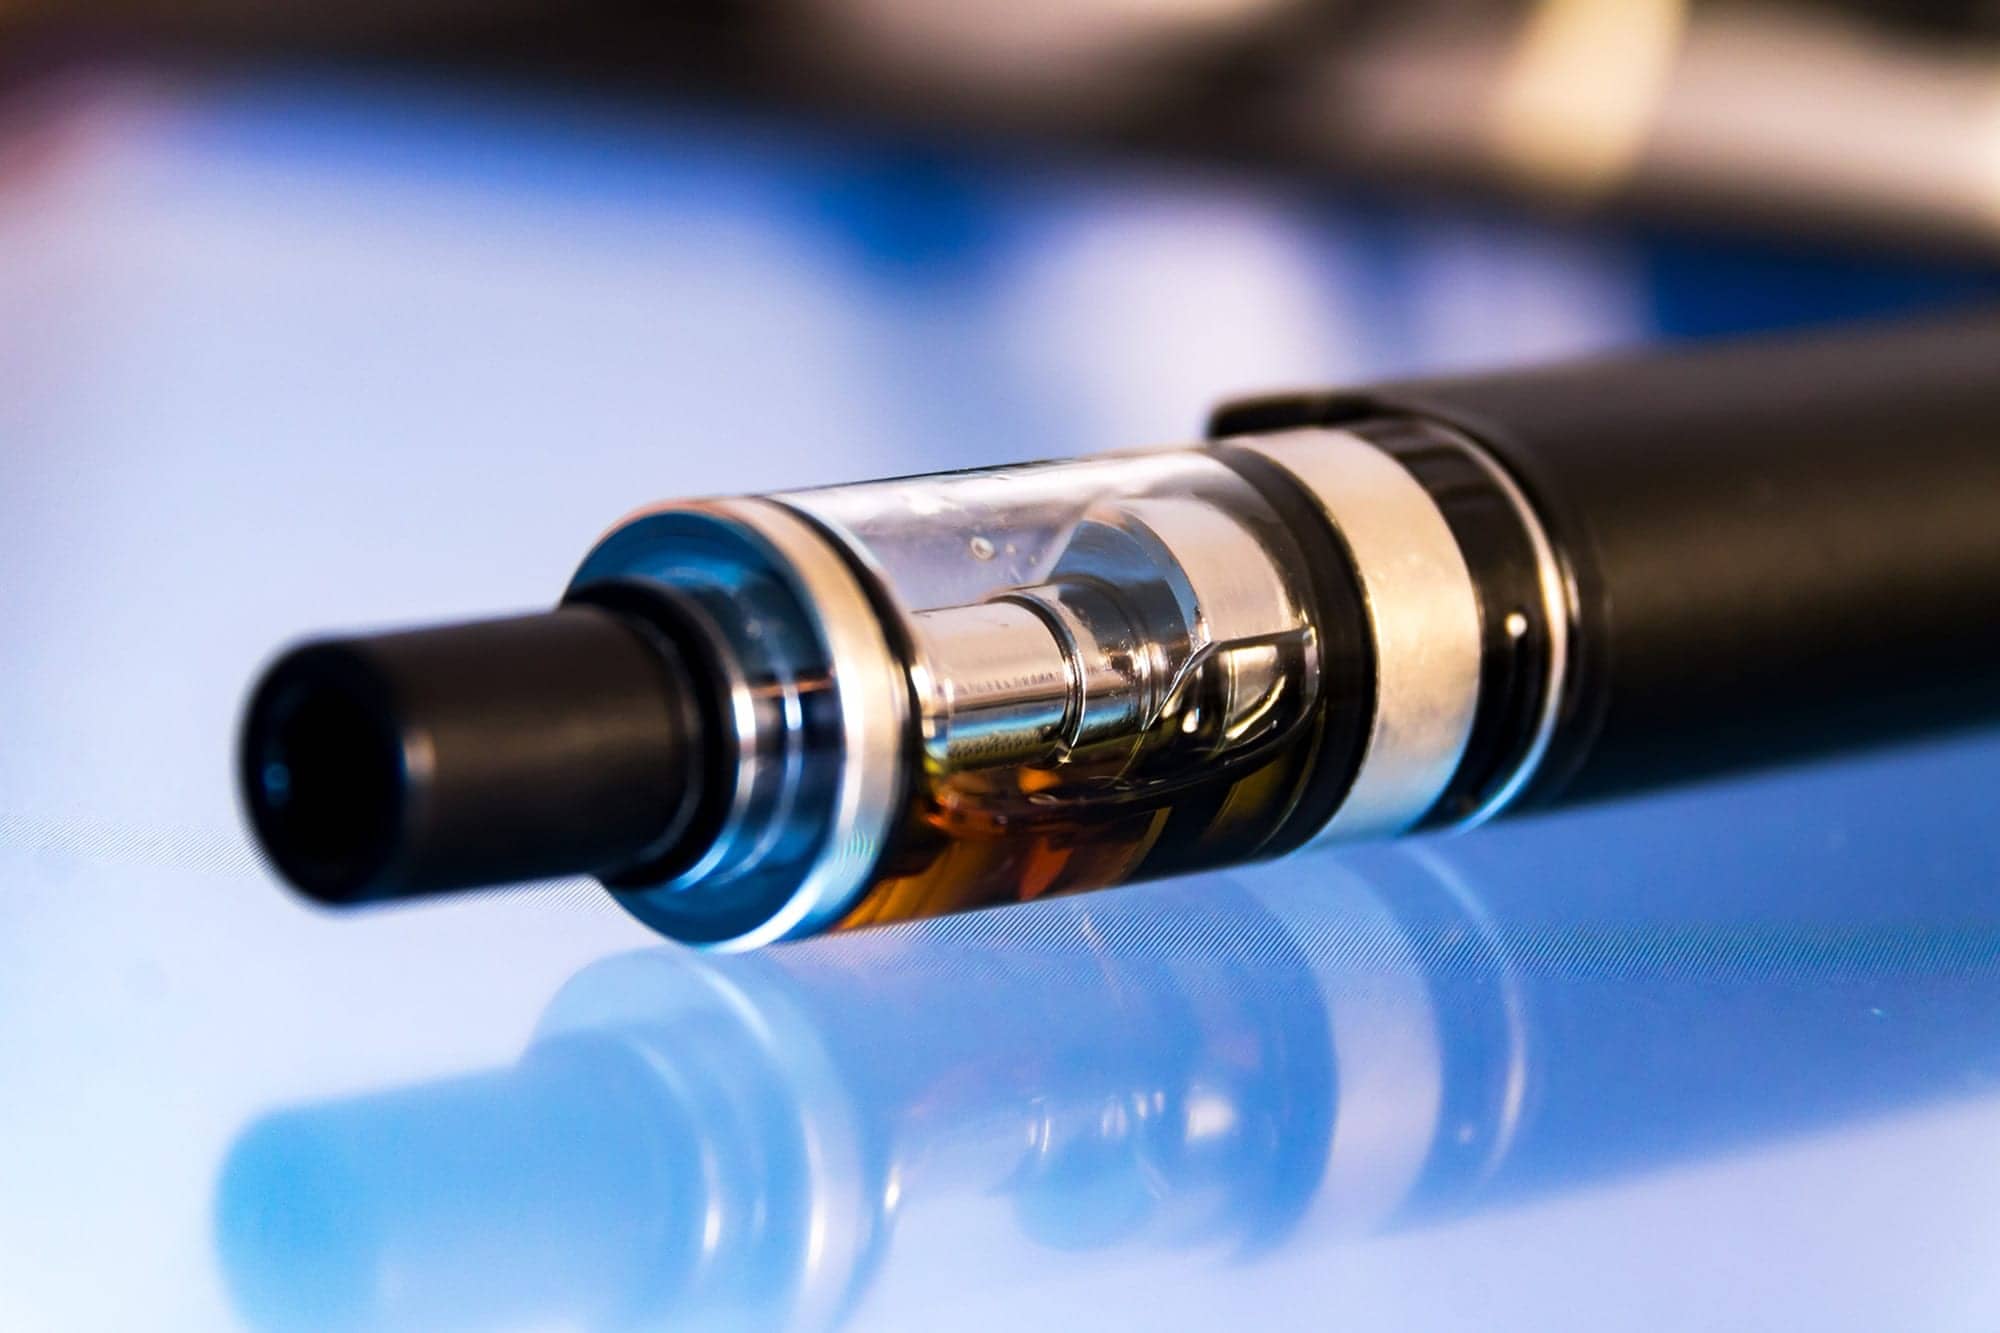 A Review of E-Cigarettes Shows Vaping Leads to Smoking, the Opposite of What Supporters Claim